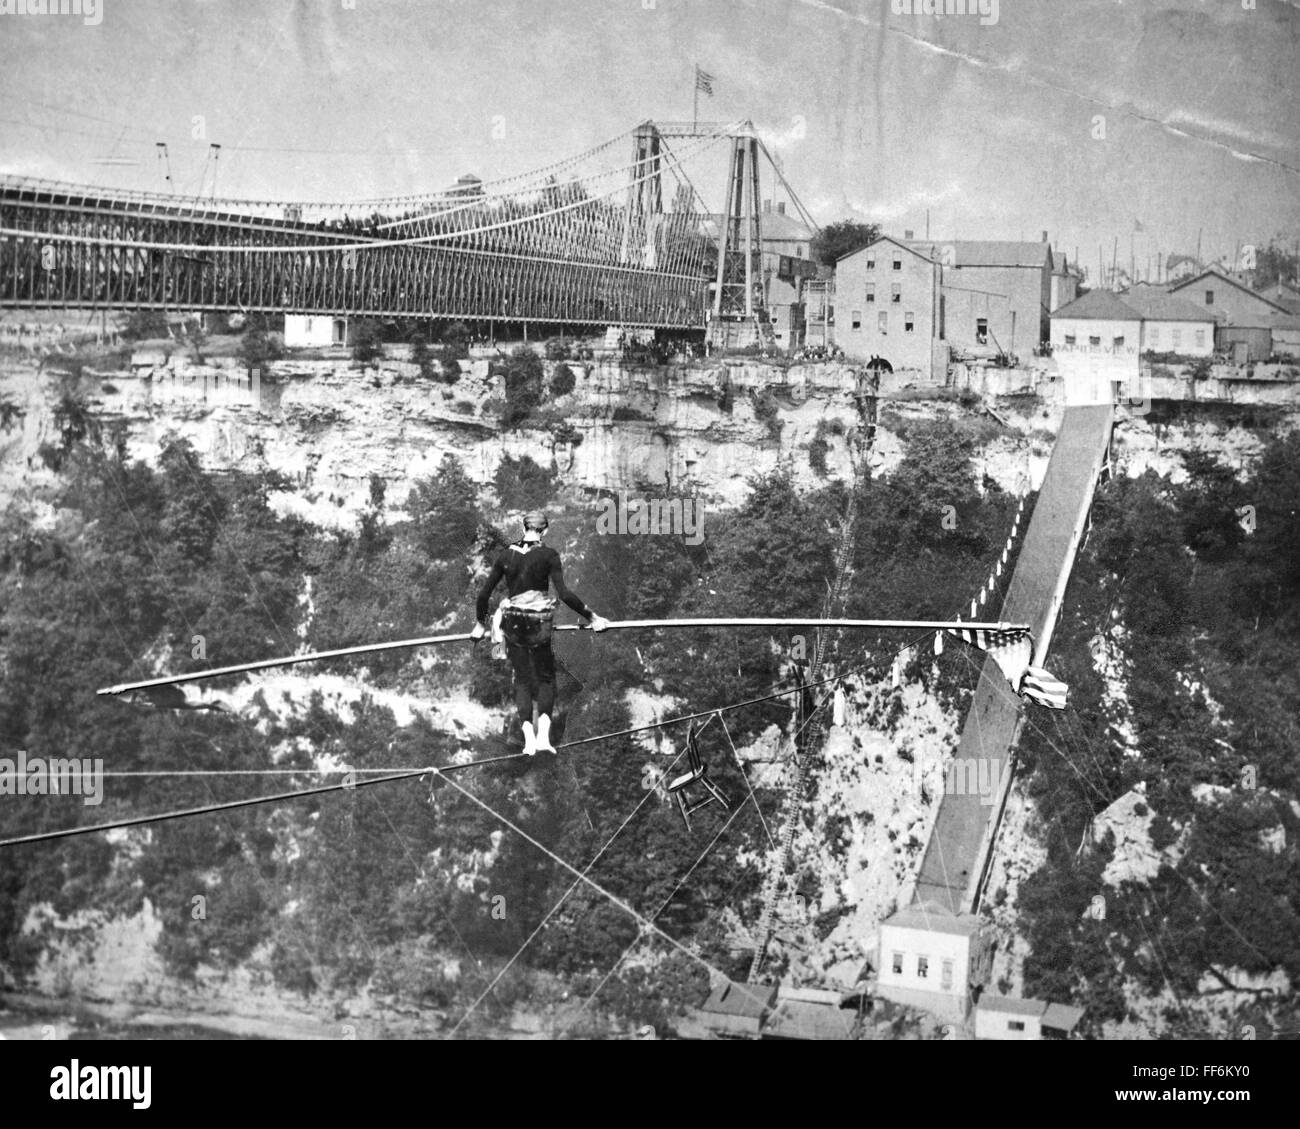 CHARLES BLONDIN (1824-1897). /nAssumed name of Jean Francois Gravelet.  French tightrope walker. Blondin crossing Niagara Falls on a tightrope in  1859 or 1860 Stock Photo - Alamy